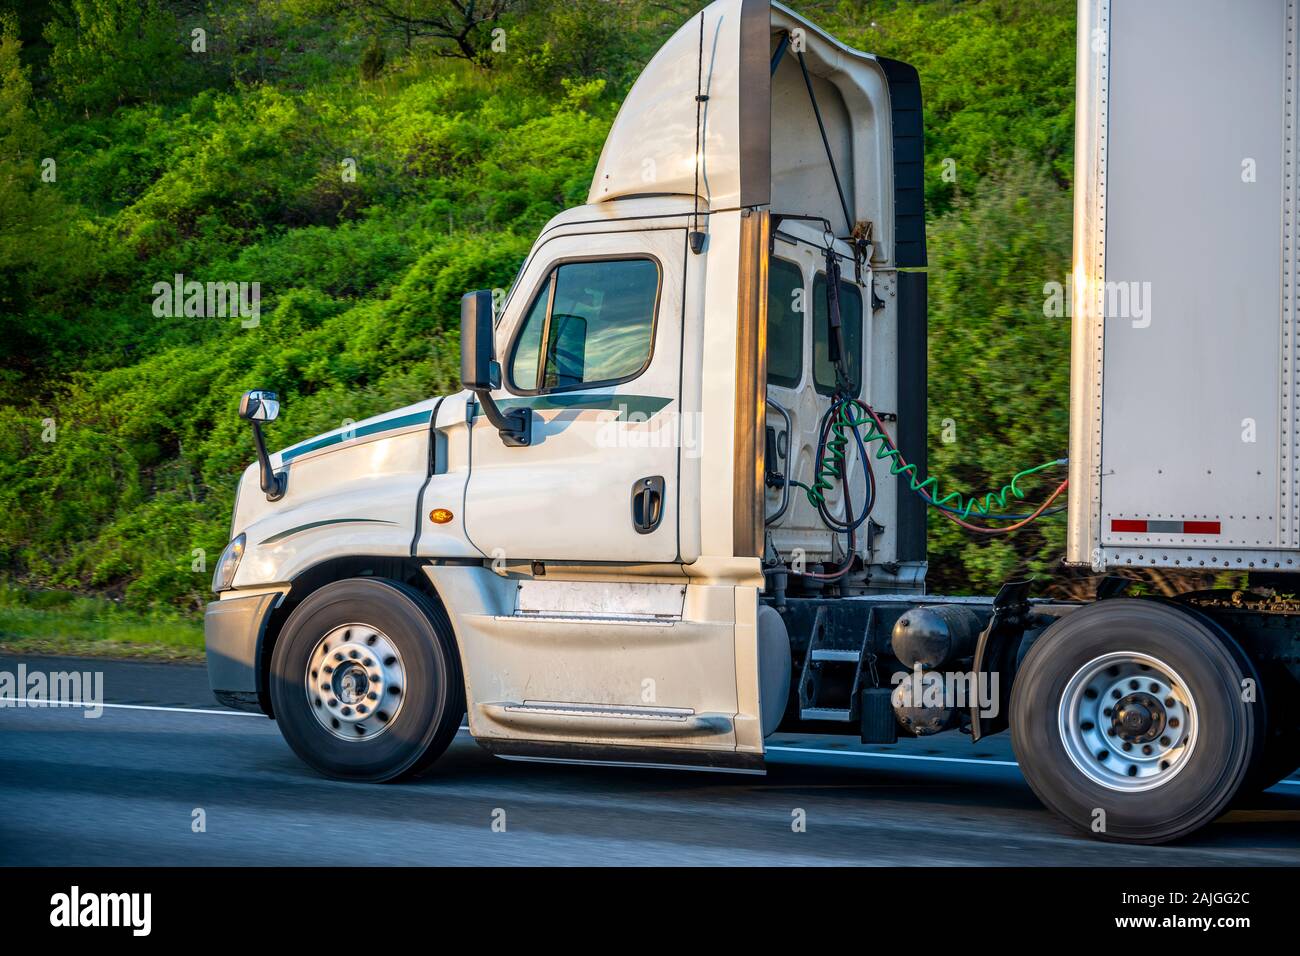 White Big rig day cab semi truck with roof spoiler for better aerodynamics and air resistance improvements transporting cargo in dry van semi trailer Stock Photo